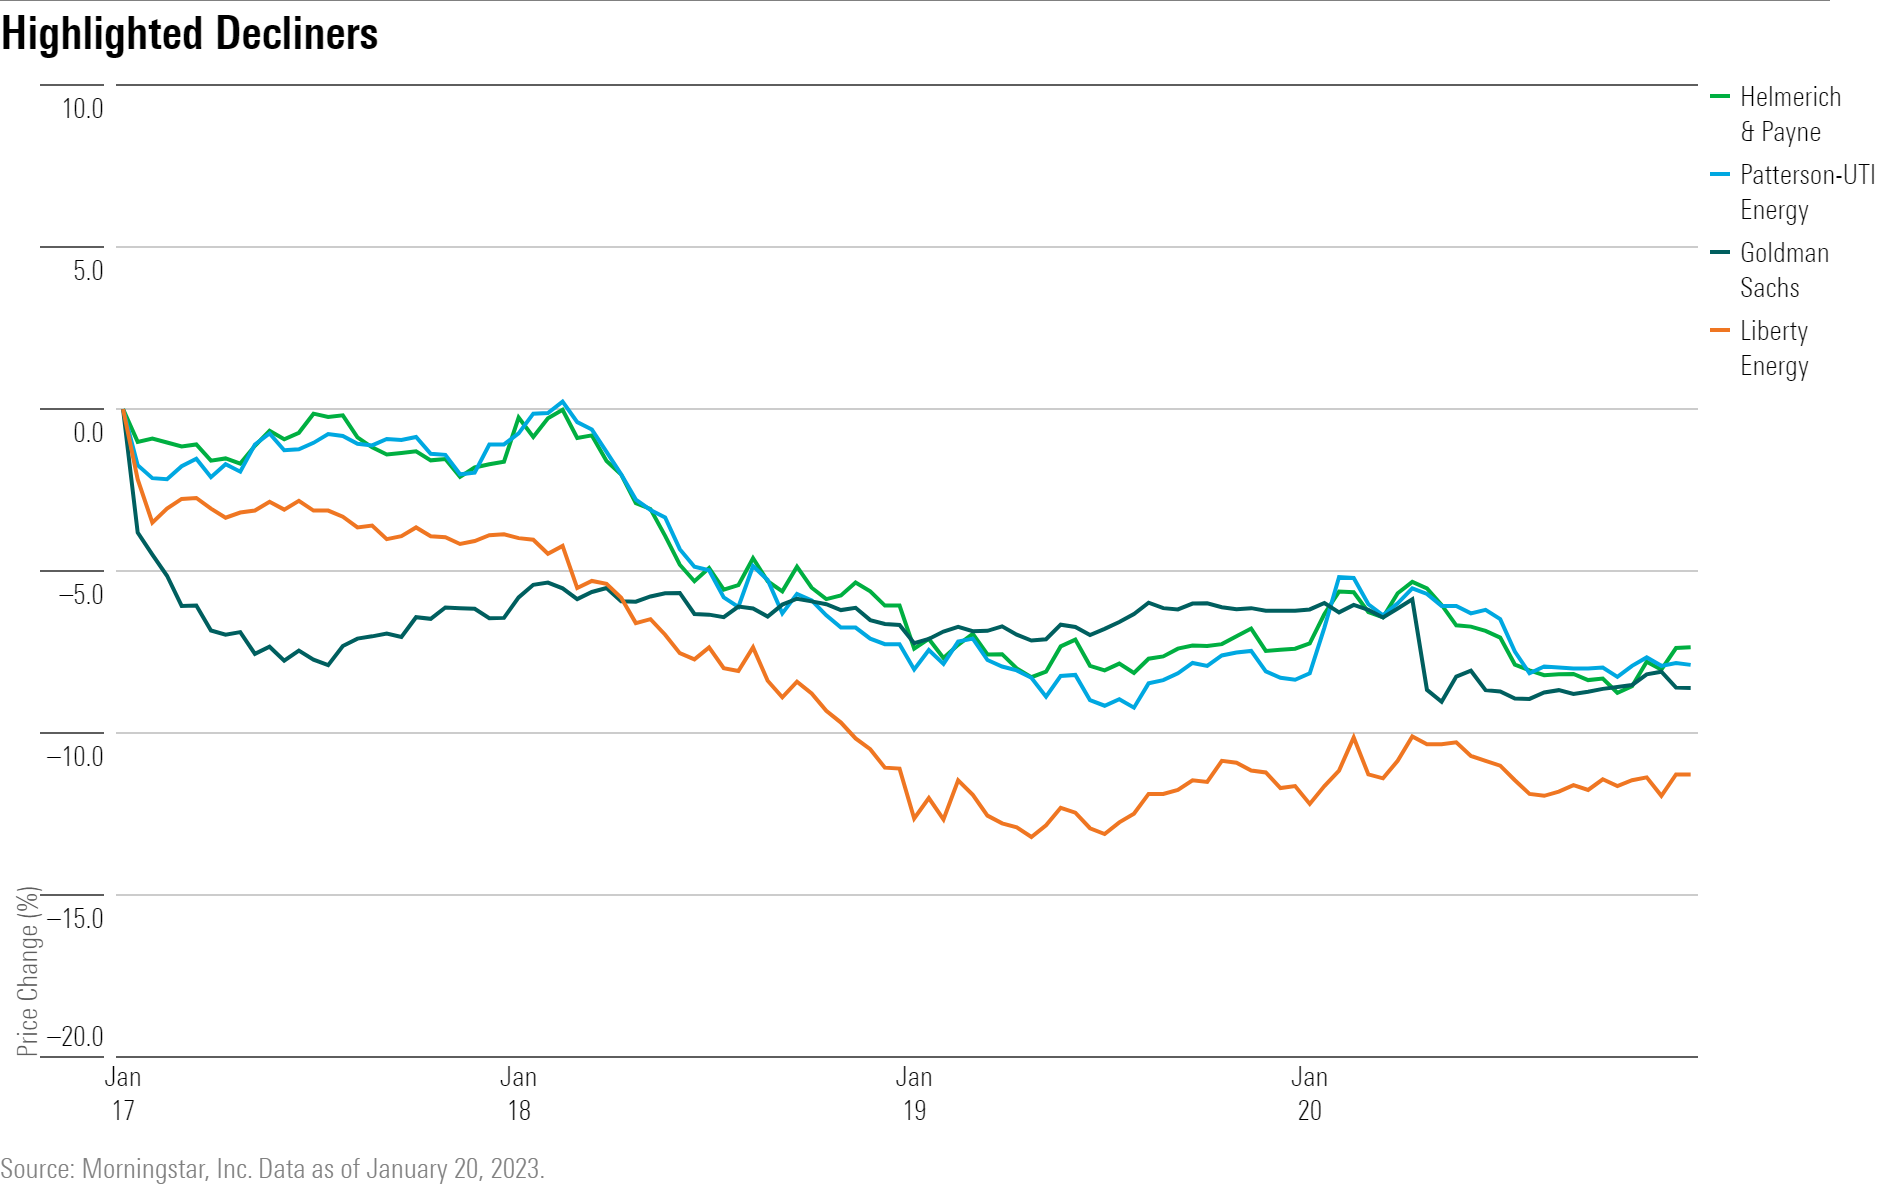 A line chart showing the performance of GS, LBRT, HP, and PTEN stock.